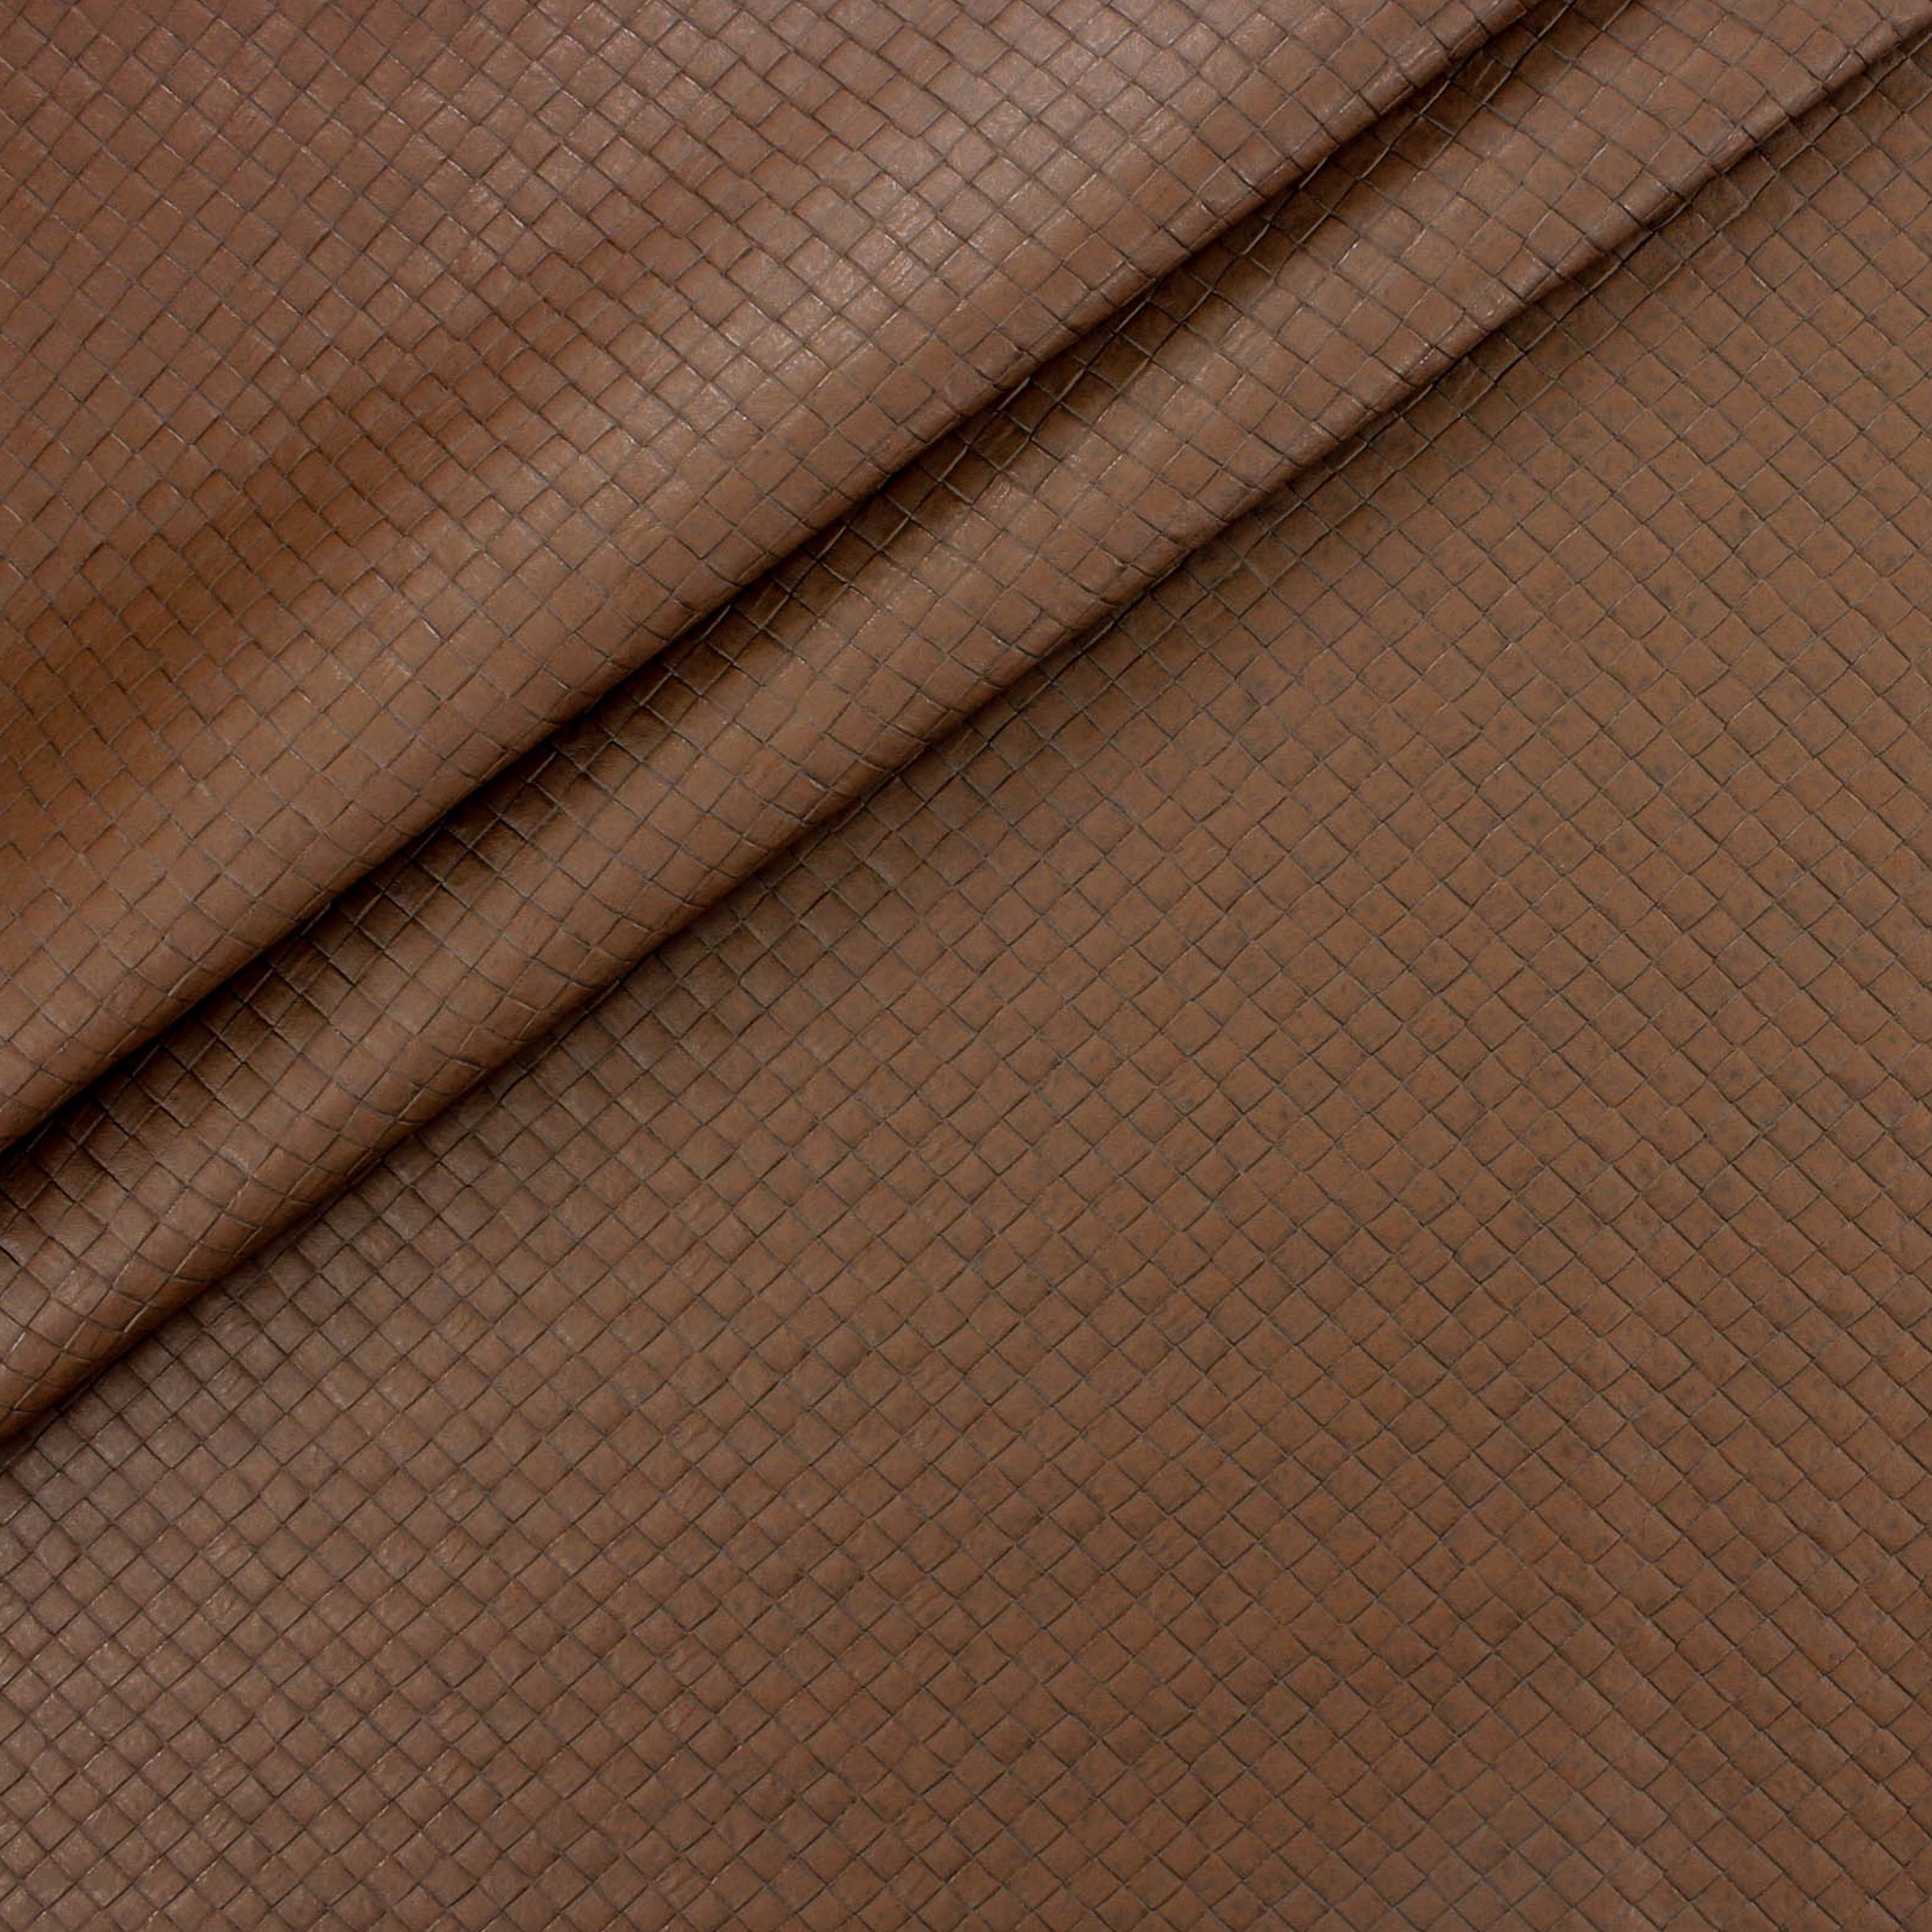 Berkshire Home Faux Leather 54 inch Basket Weave Chocolate Fabric, by The Yard